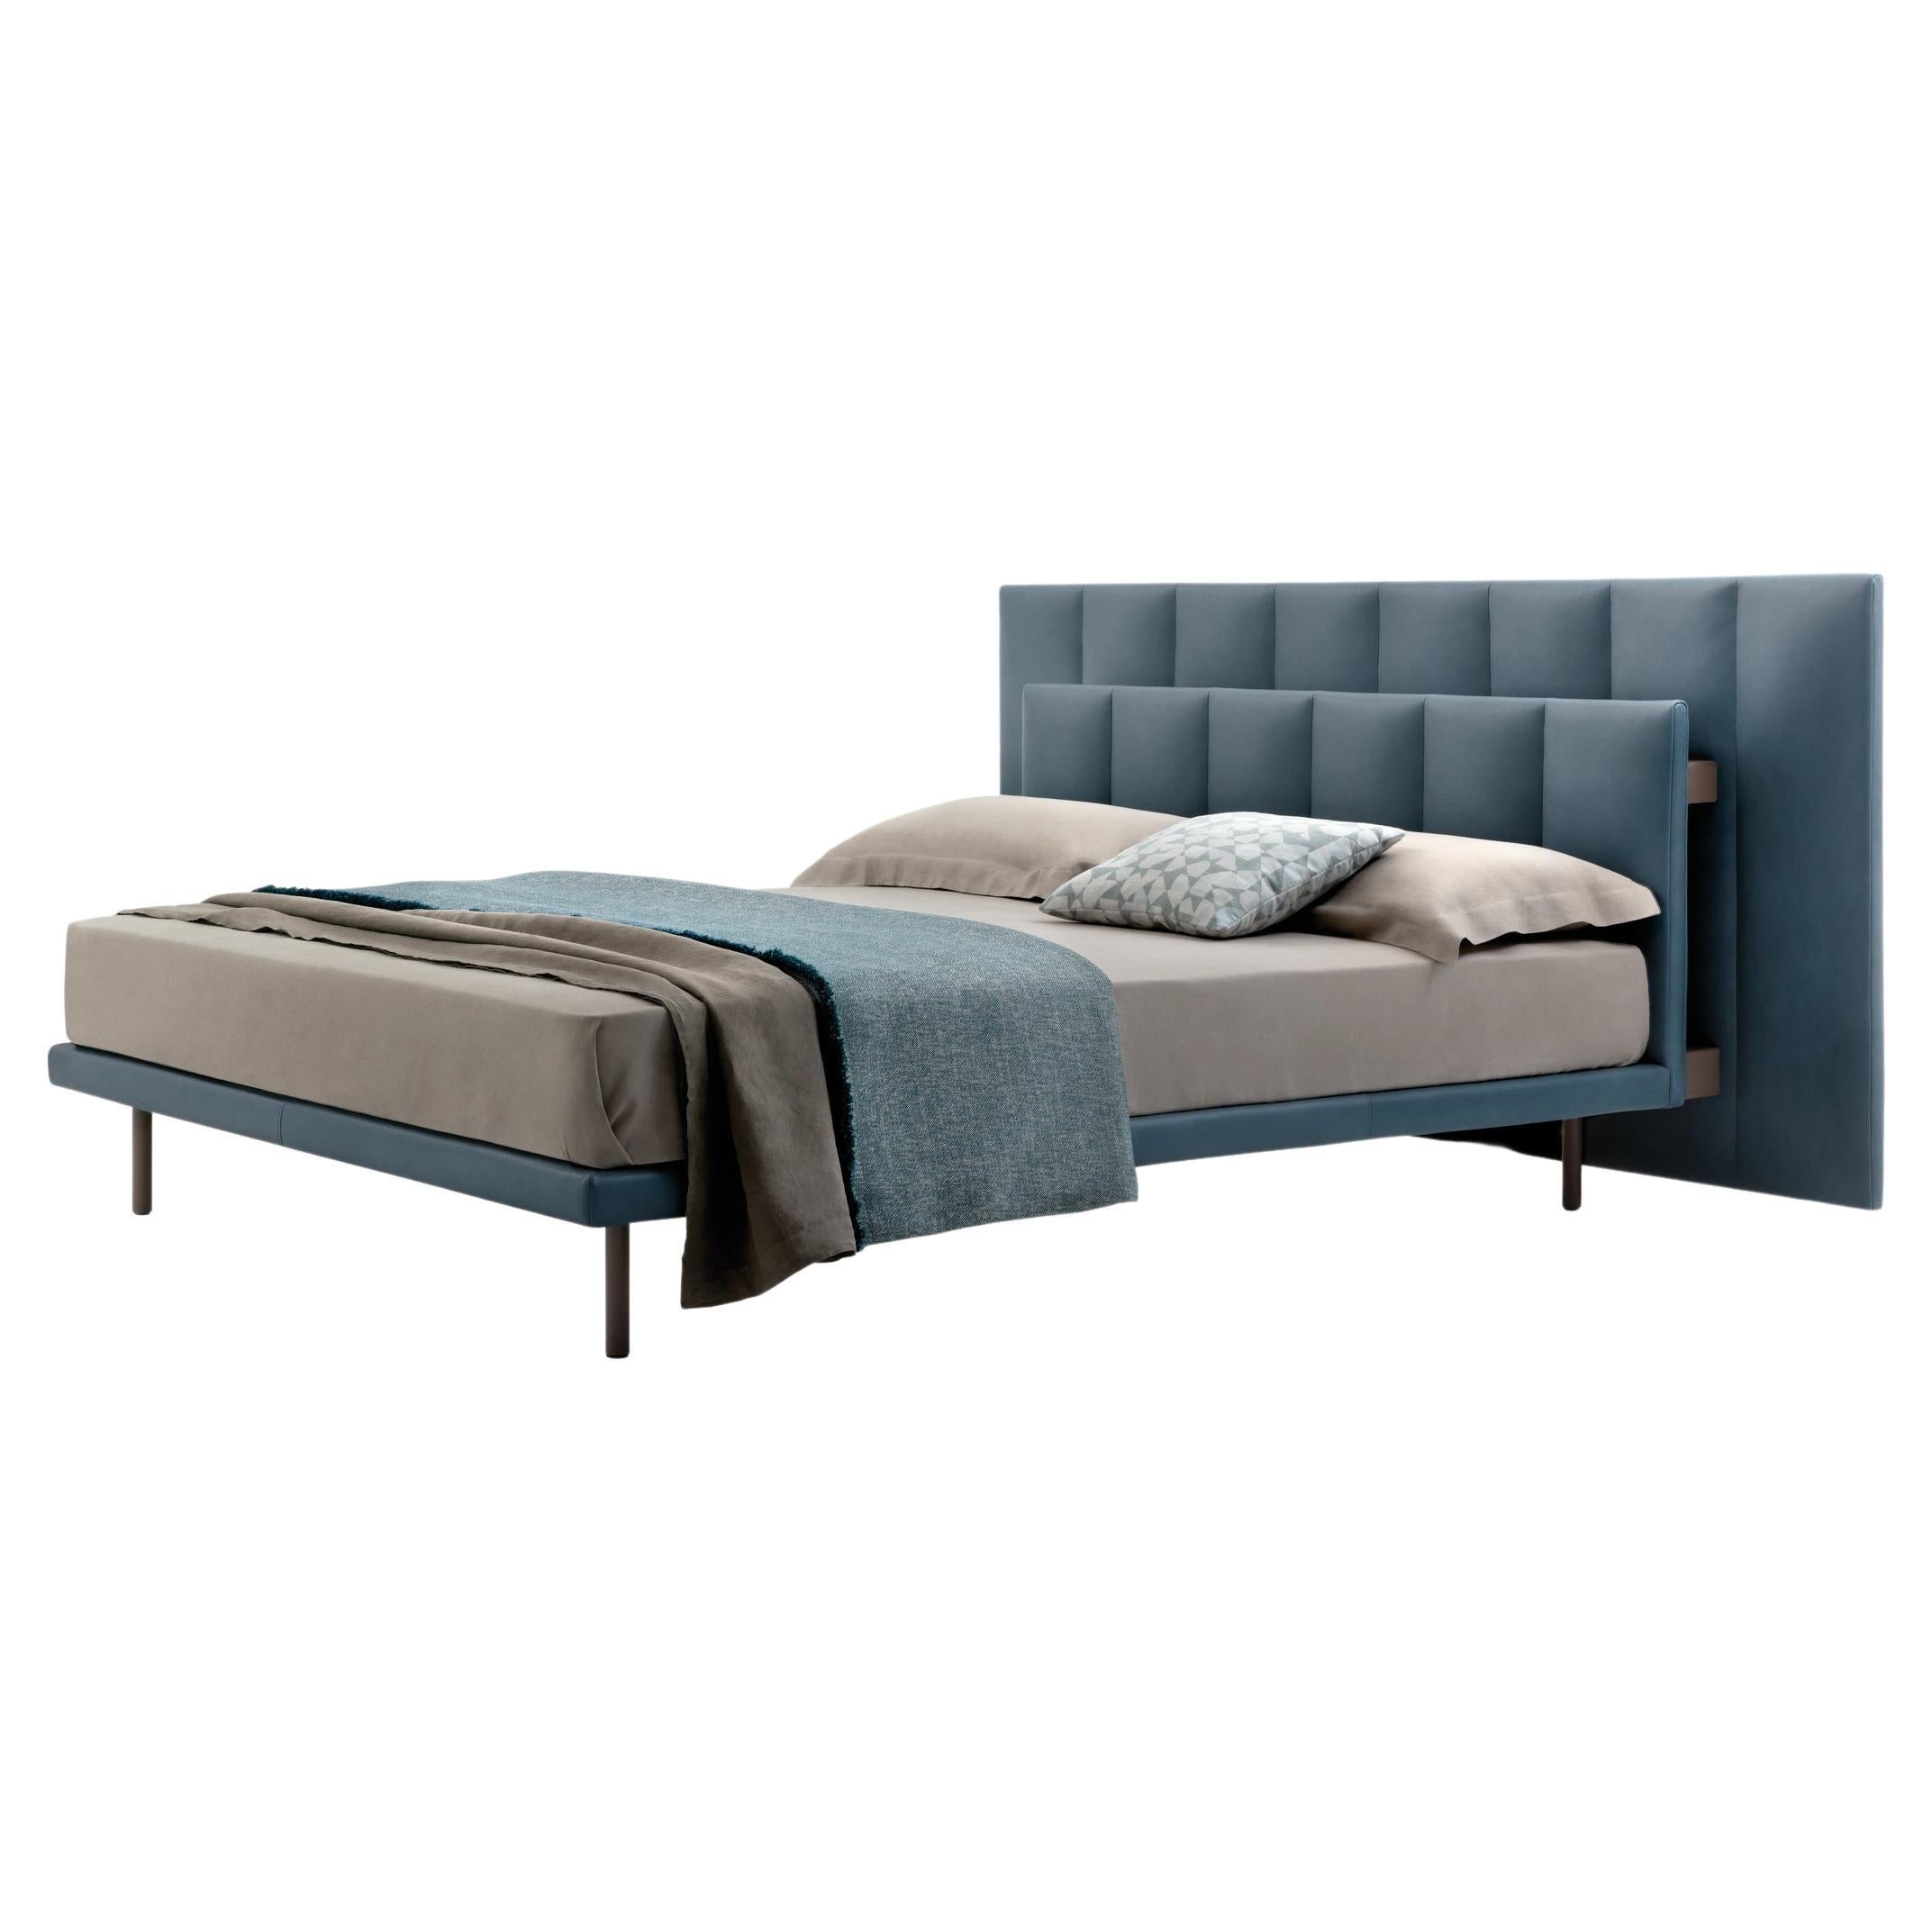 Zanotta Queen Size Grangala Bed with Separate Springing in Grey Upholstery